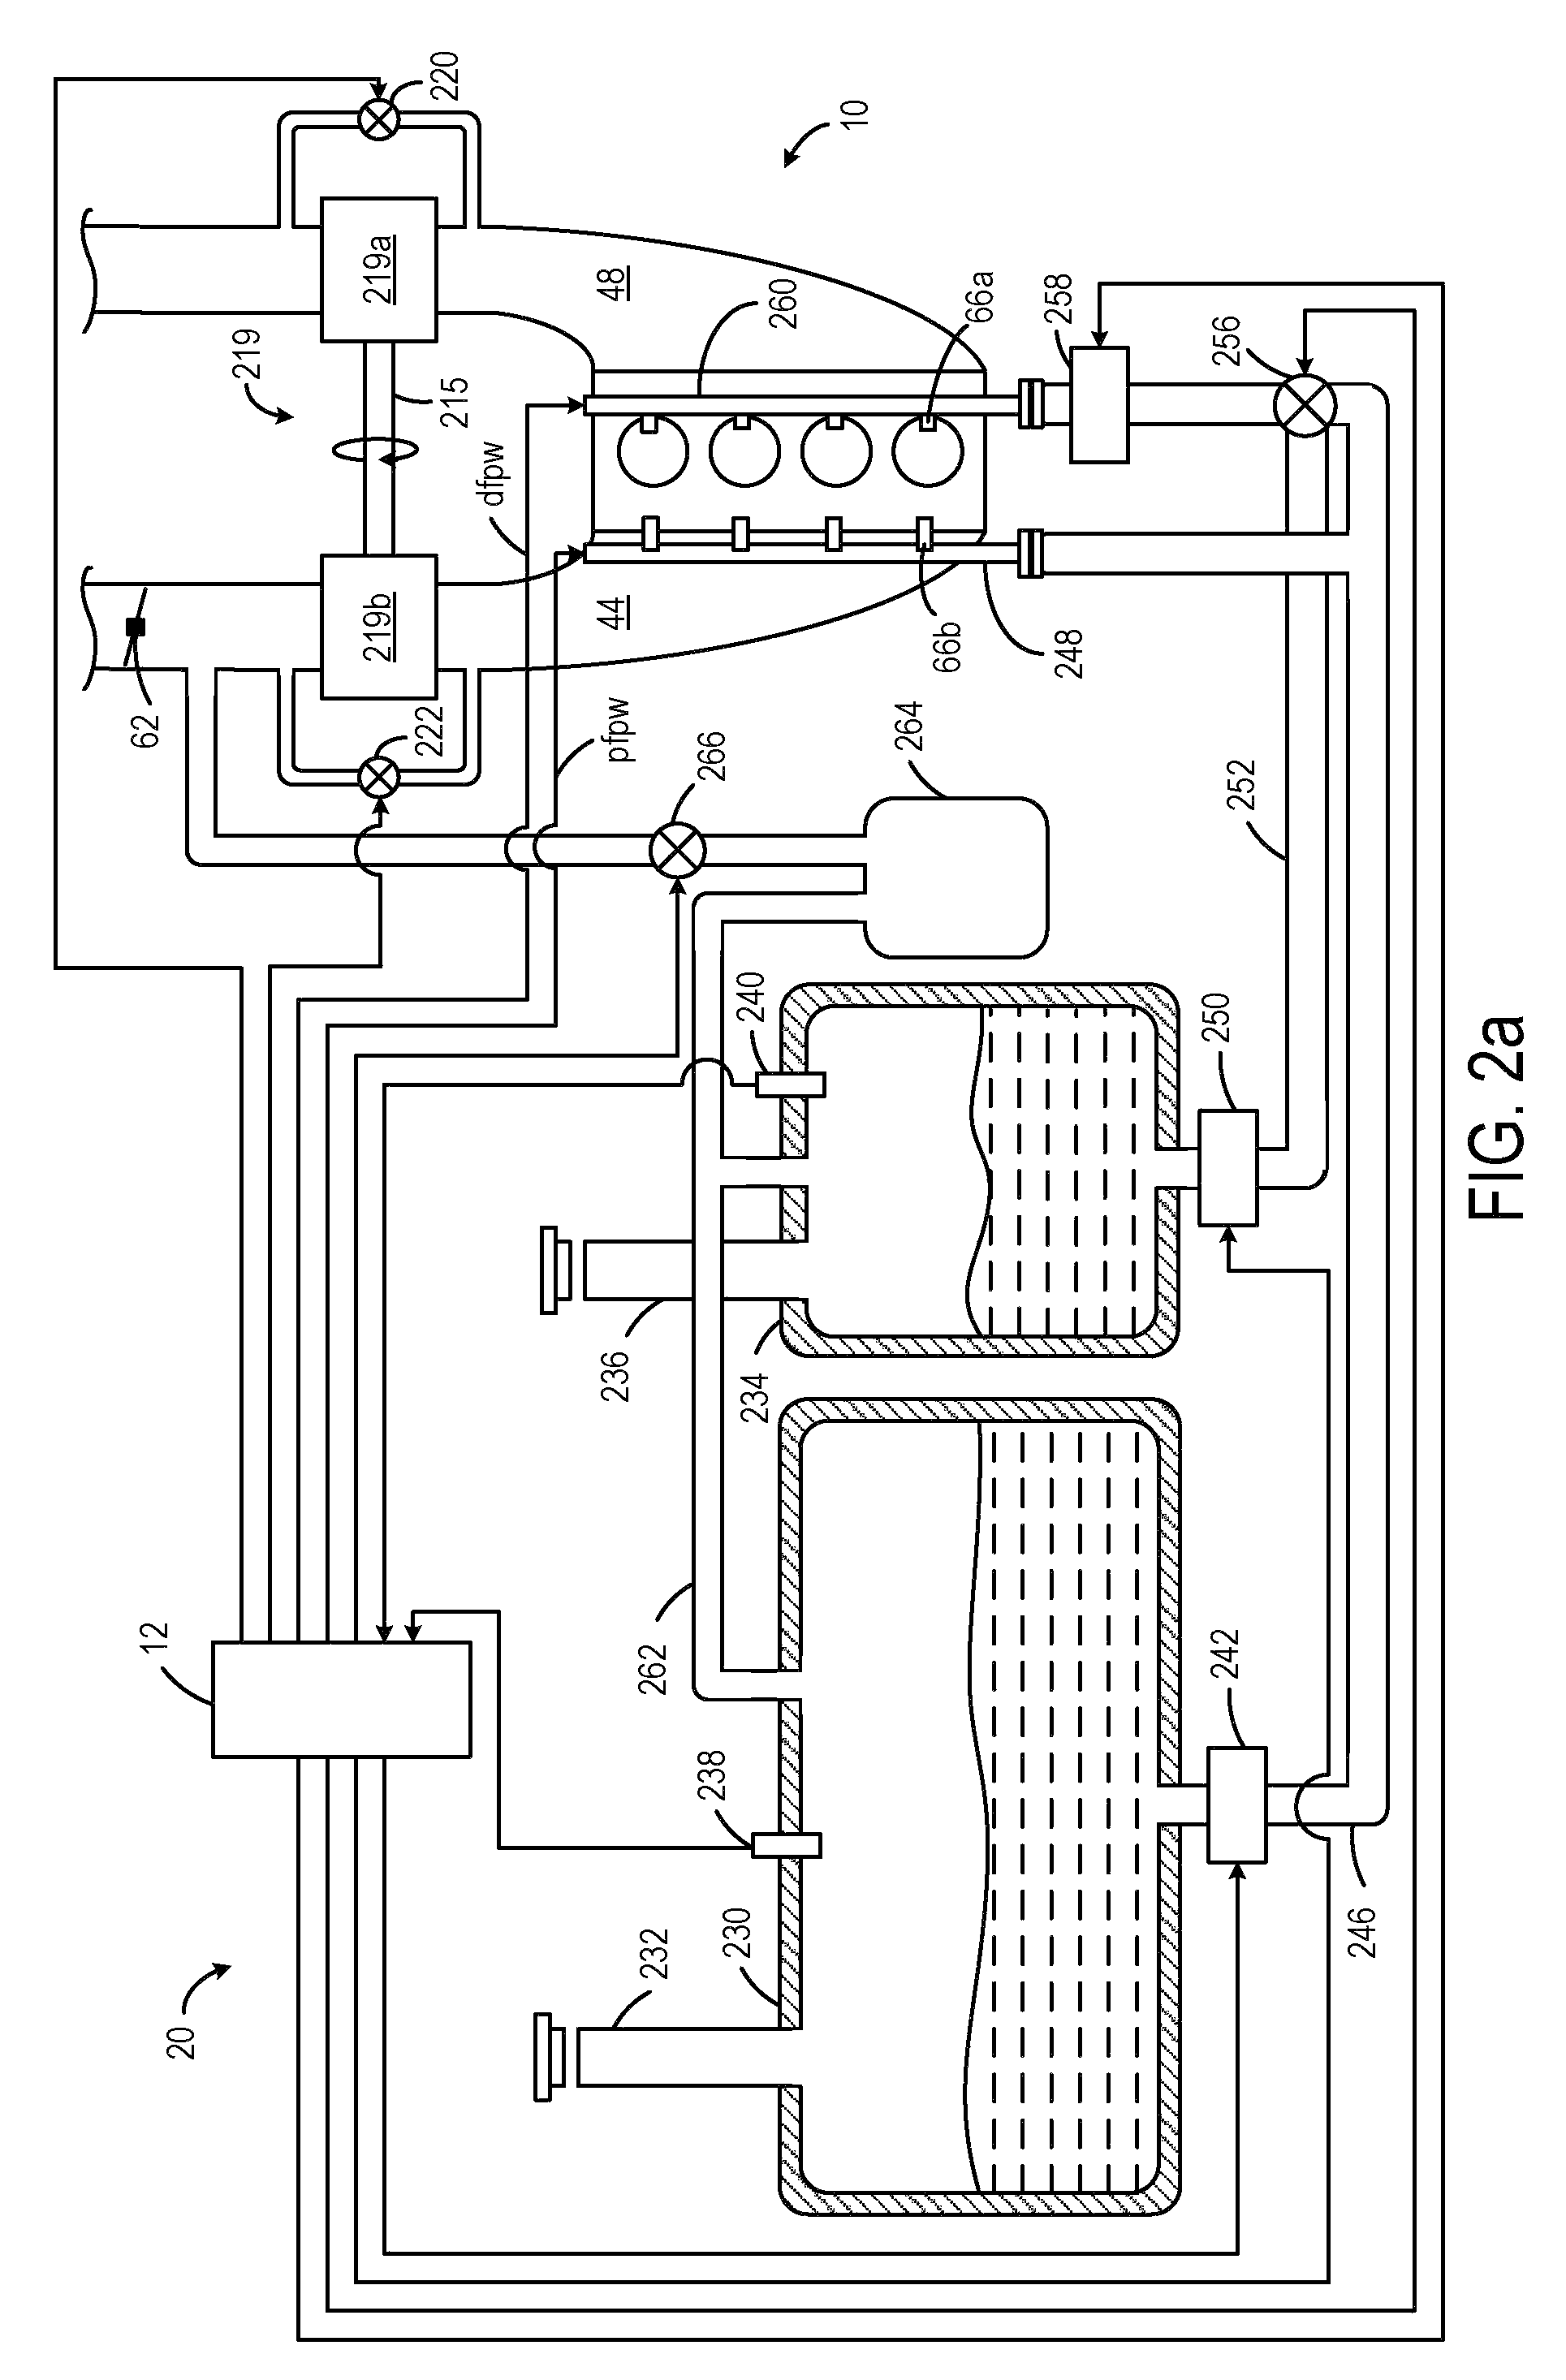 Approach for reducing overheating of direct injection fuel injectors